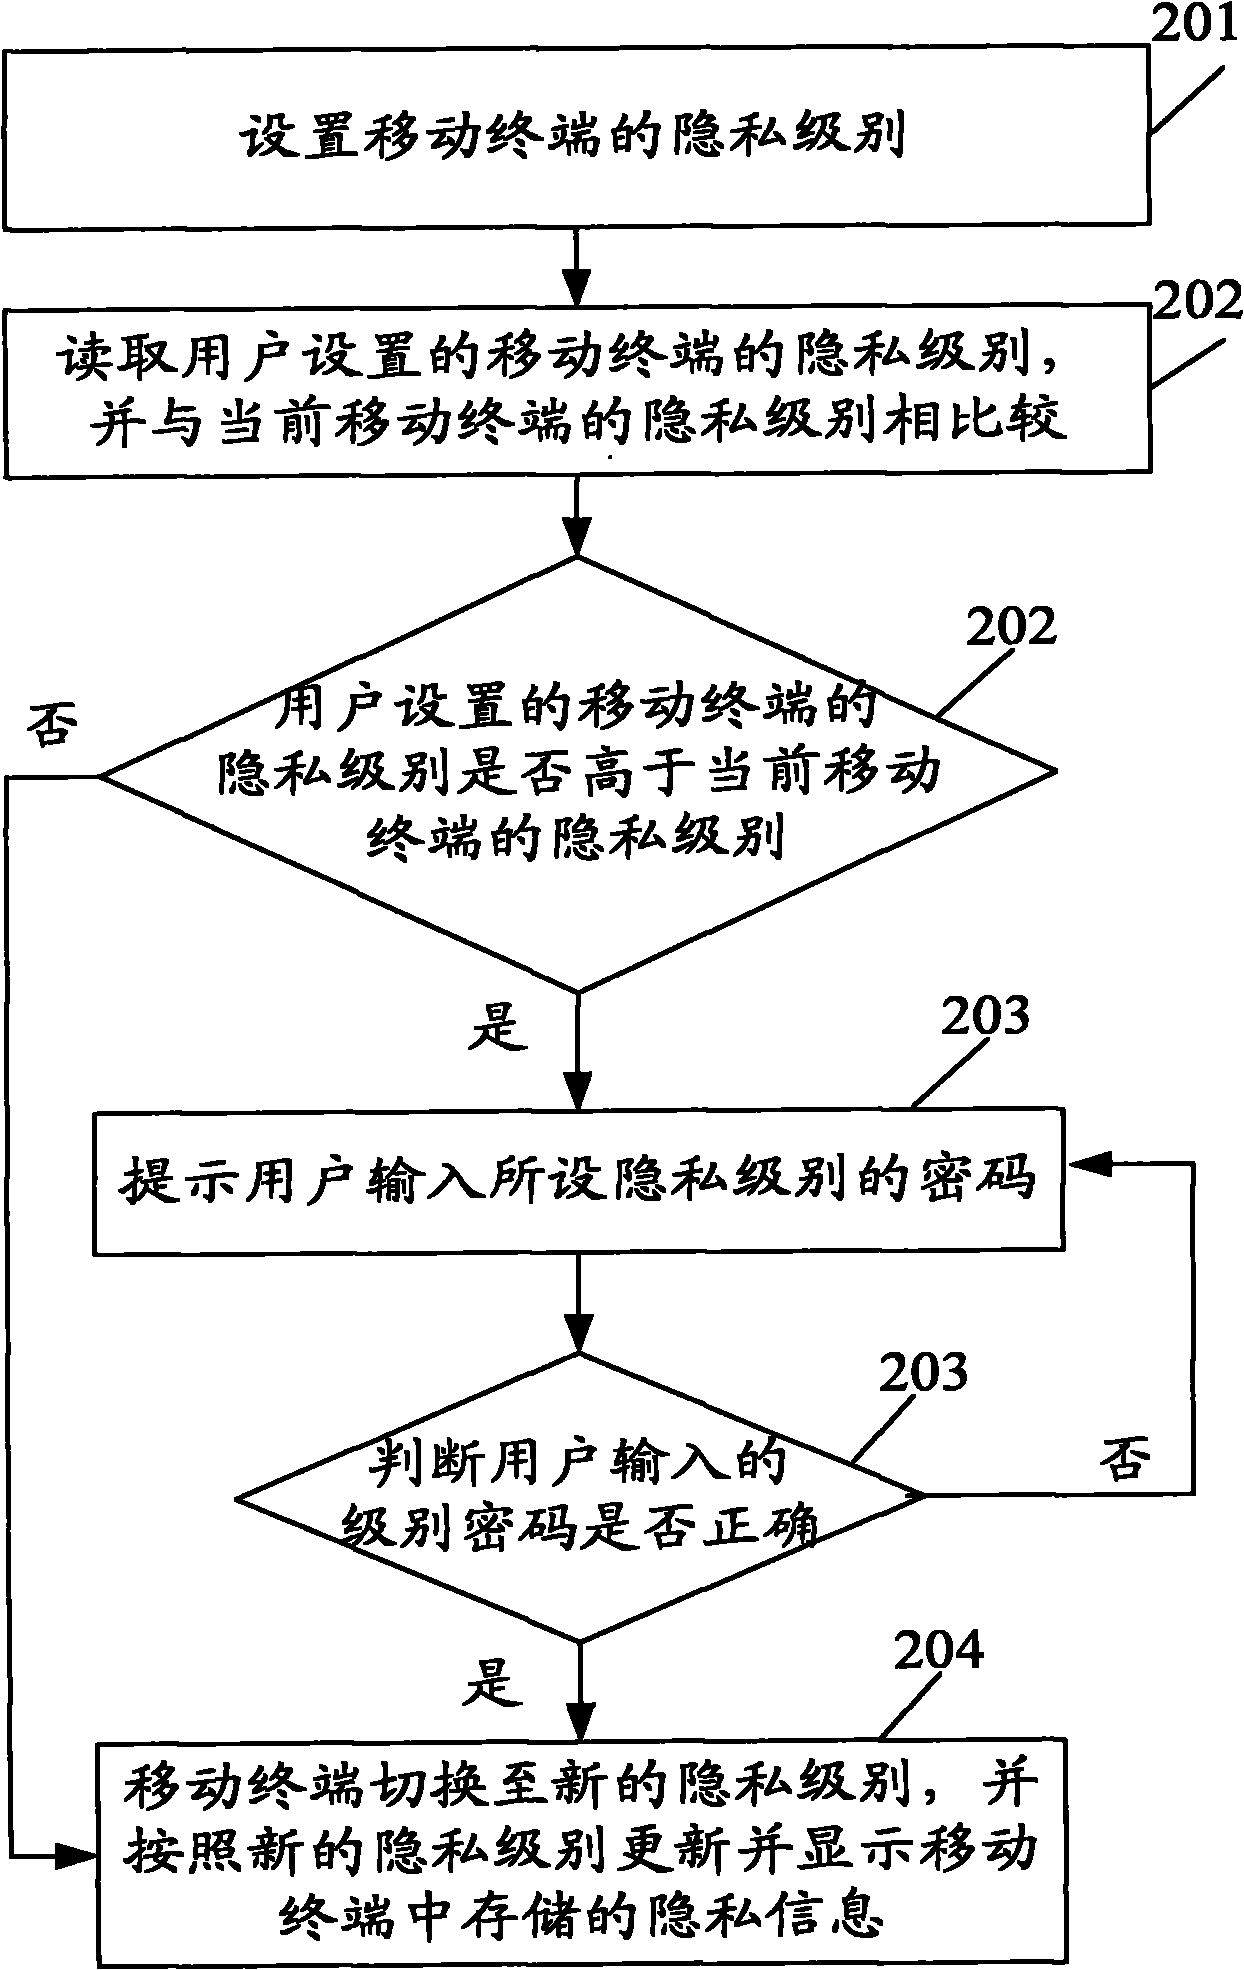 Method and device for implementing graded display of privacy information